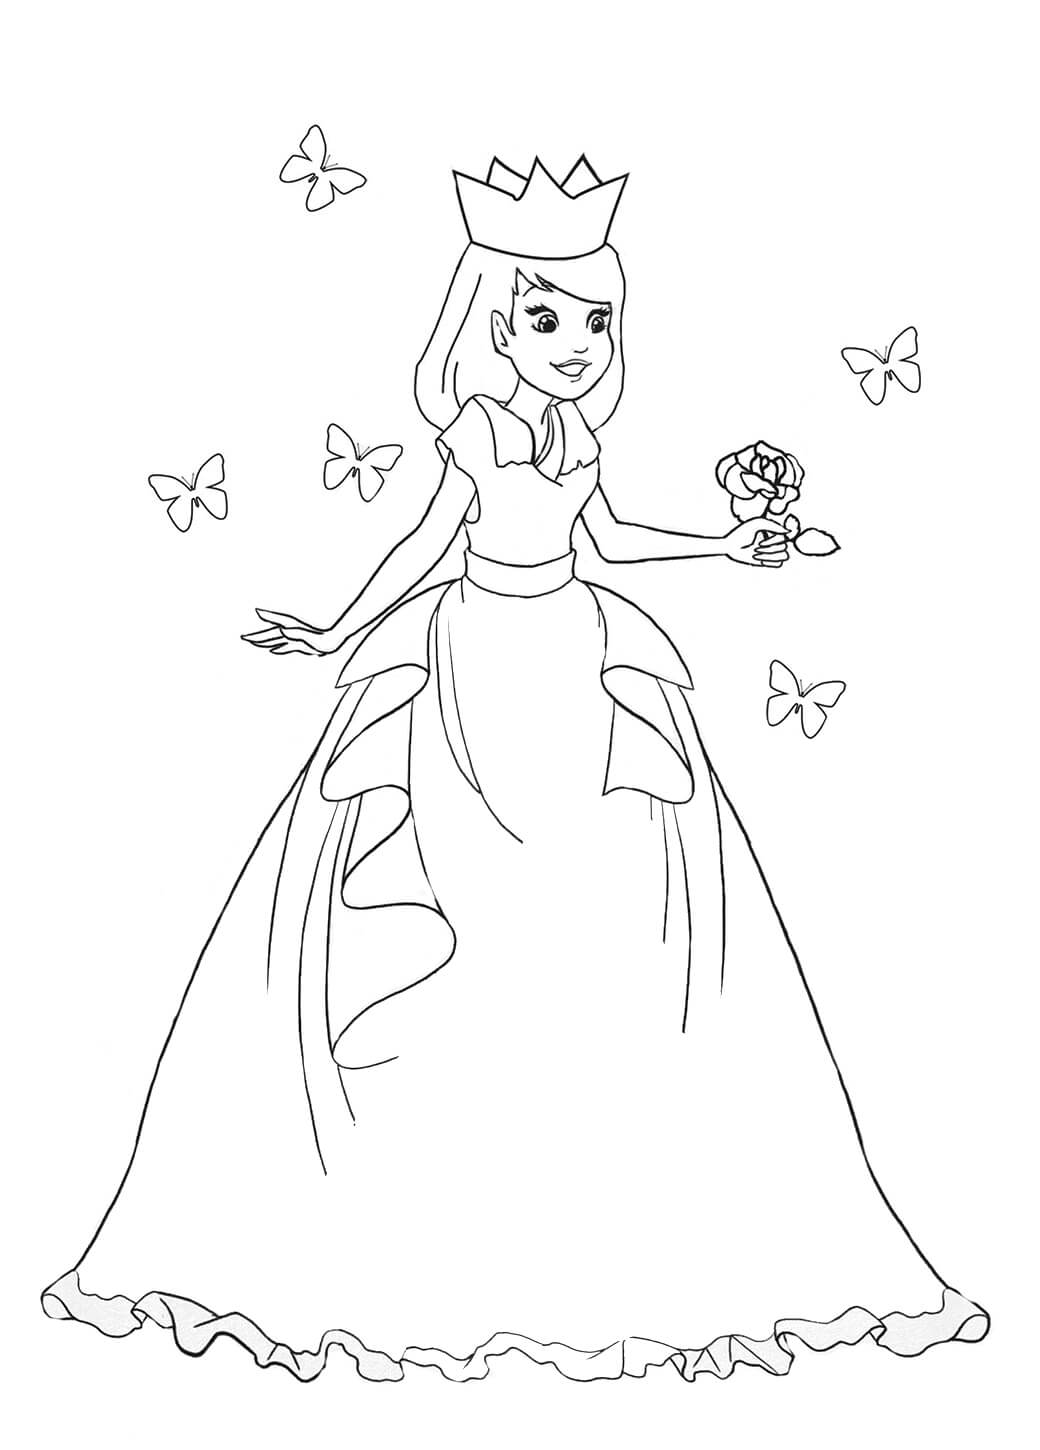 Princess holding Flower with Butterflies